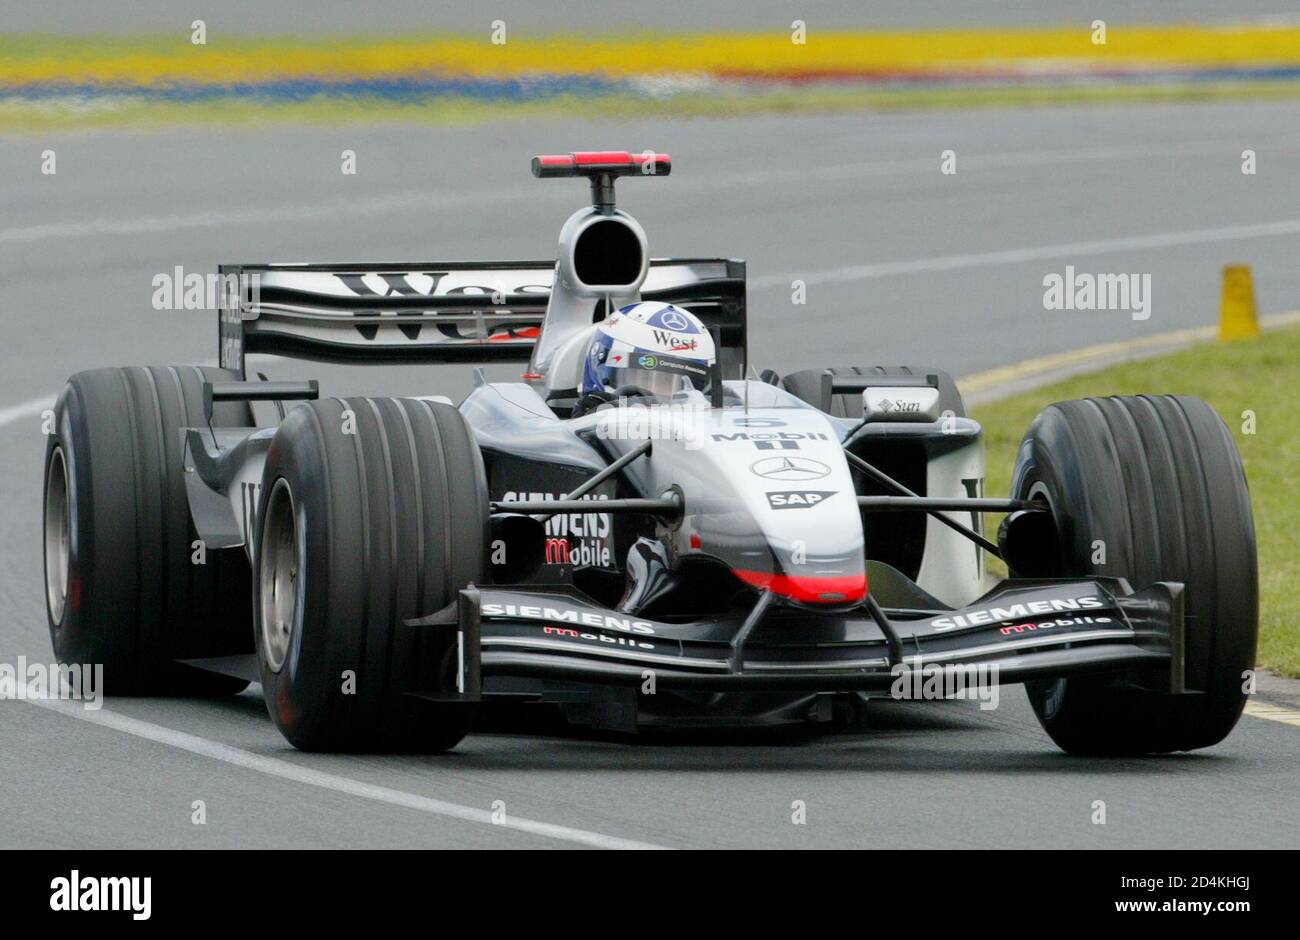 Scotland's David Coulthard in action on his way to winning the Grand Prix at Melbourne's Albert Park circuit March 9, 2003. Coulthard handed McLaren winning start to the Formula One